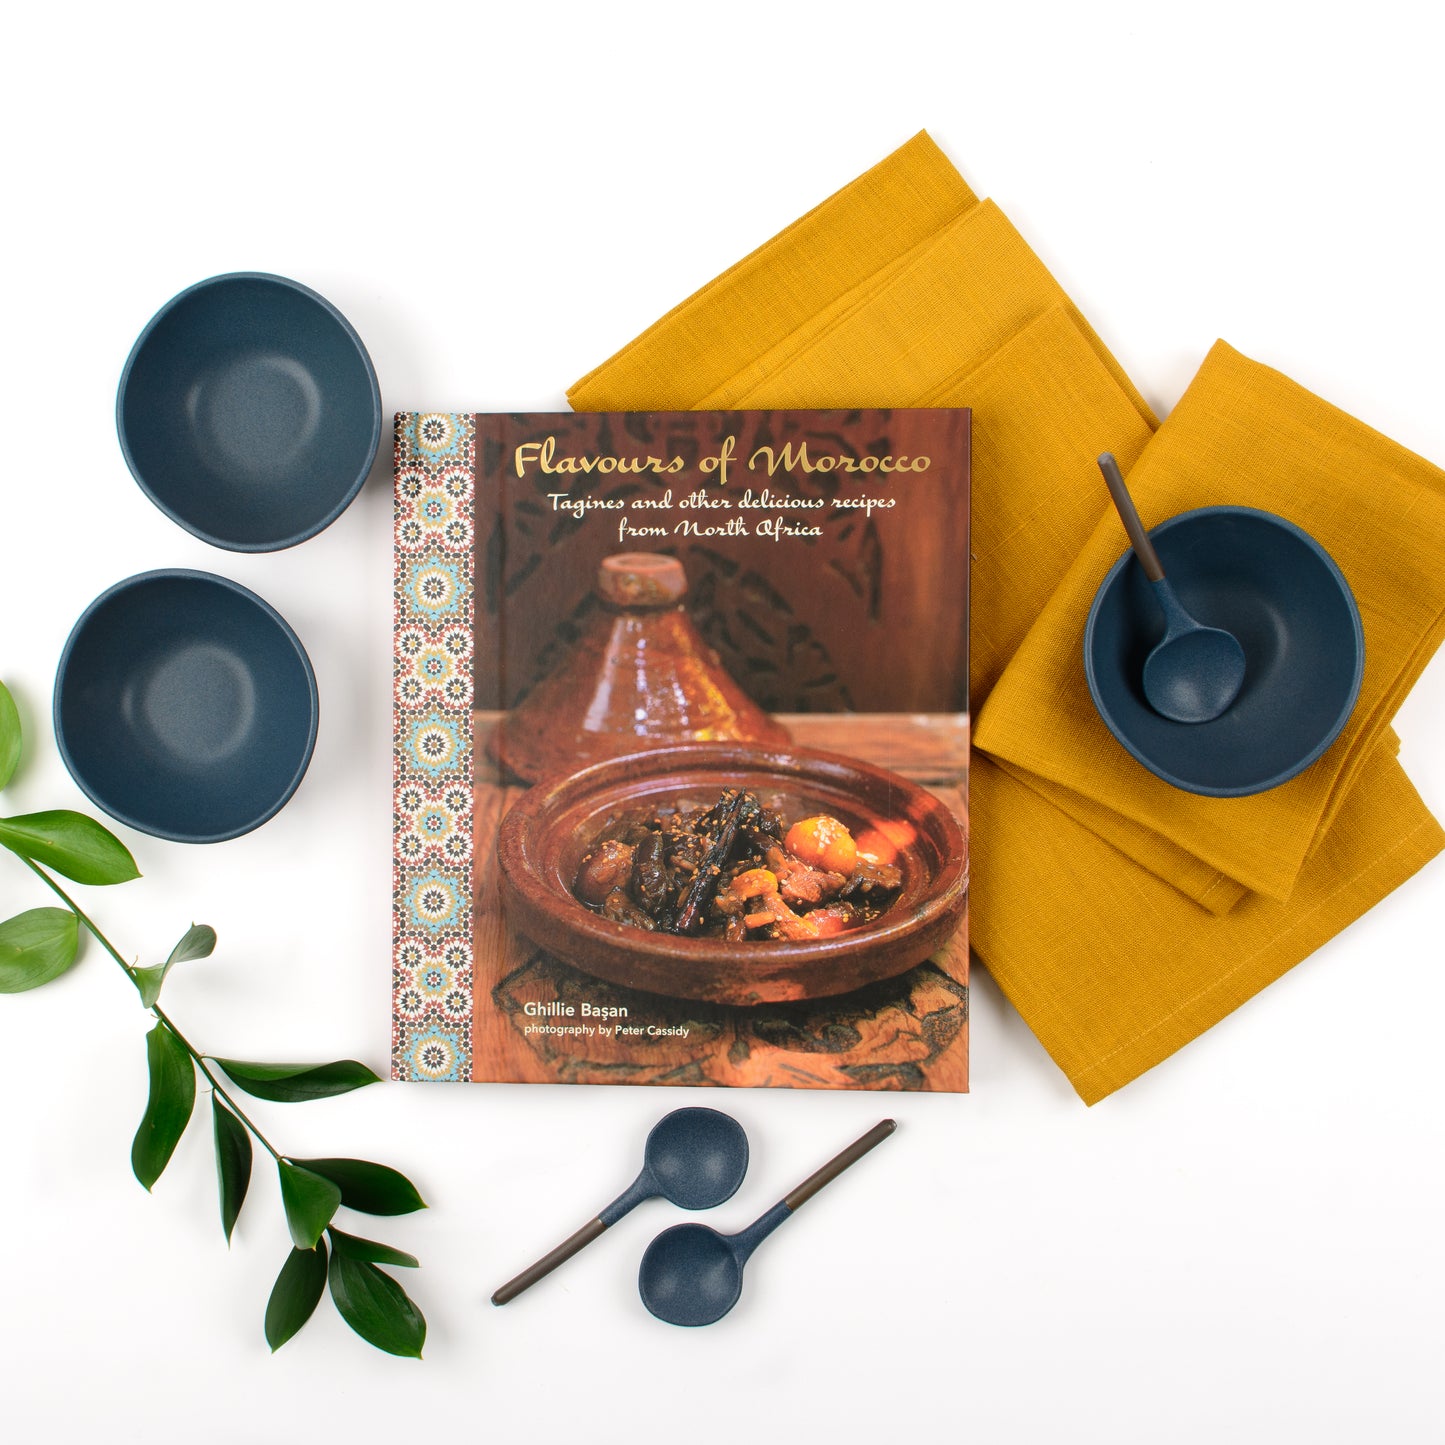 Products displayed out of gift box featuring cookbook, set of linen napkins, three ceramic bowls and matching spoons